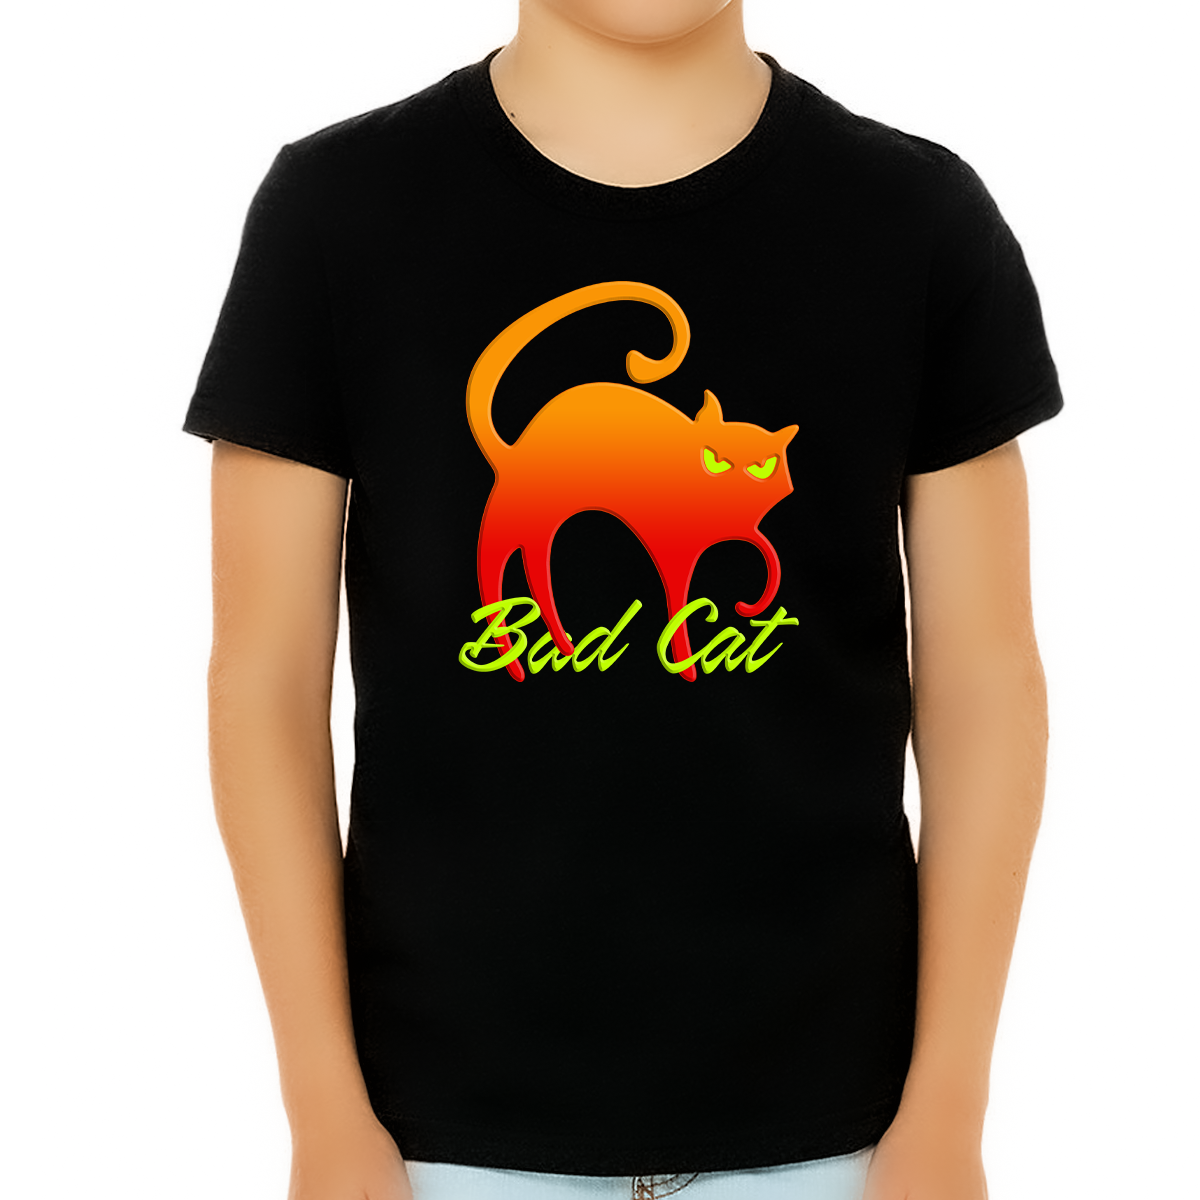 Bad Cat Shirt - Cat Shirts for Boys - Cat Gifts for Boys - Kids Cat Lover Shirts - Fire Fit Designs